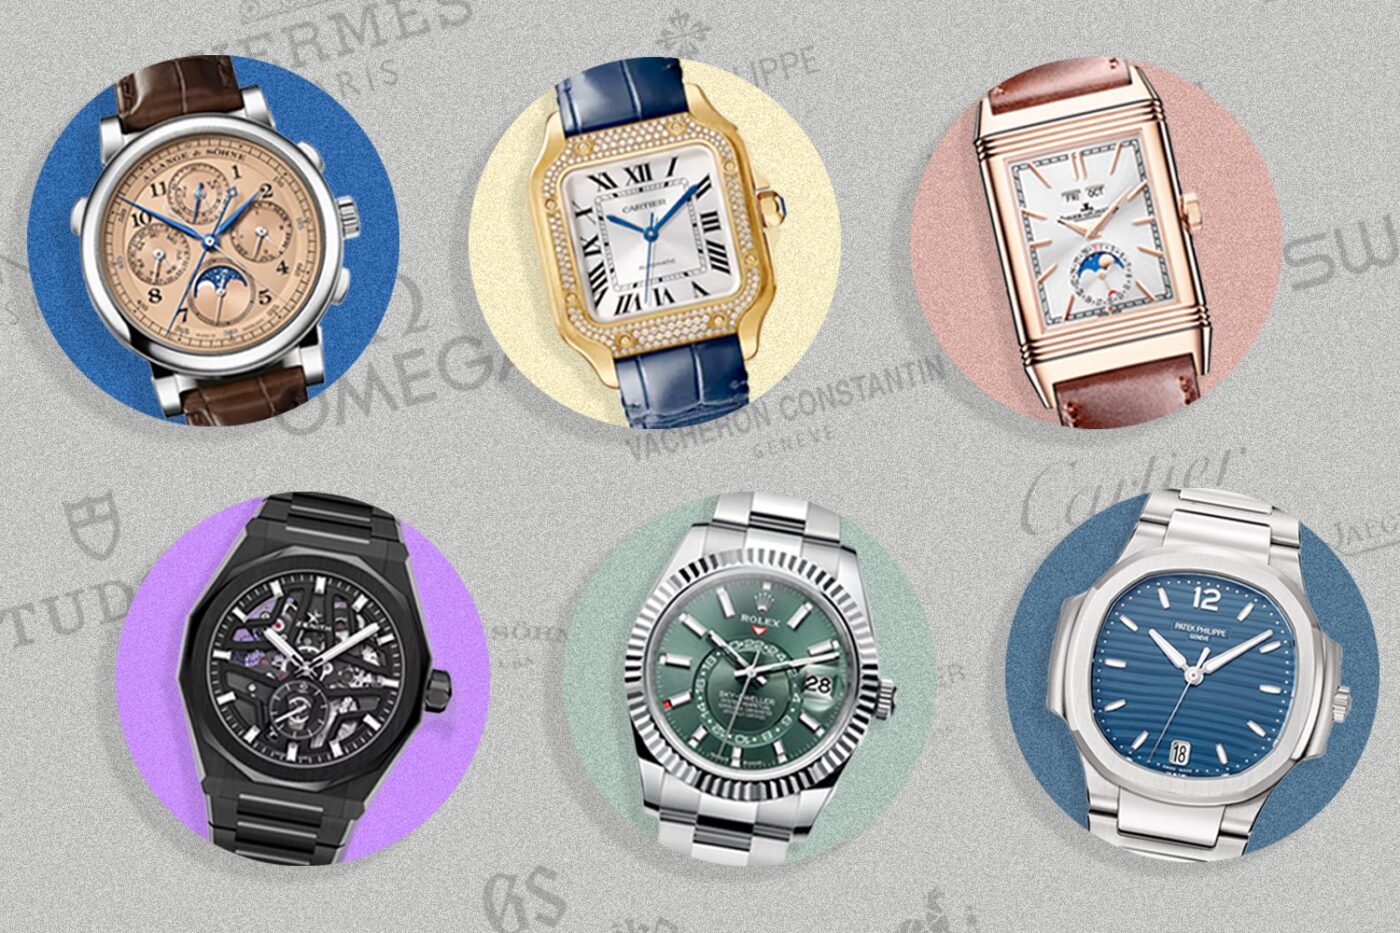 Introduction to the global wristwatch market